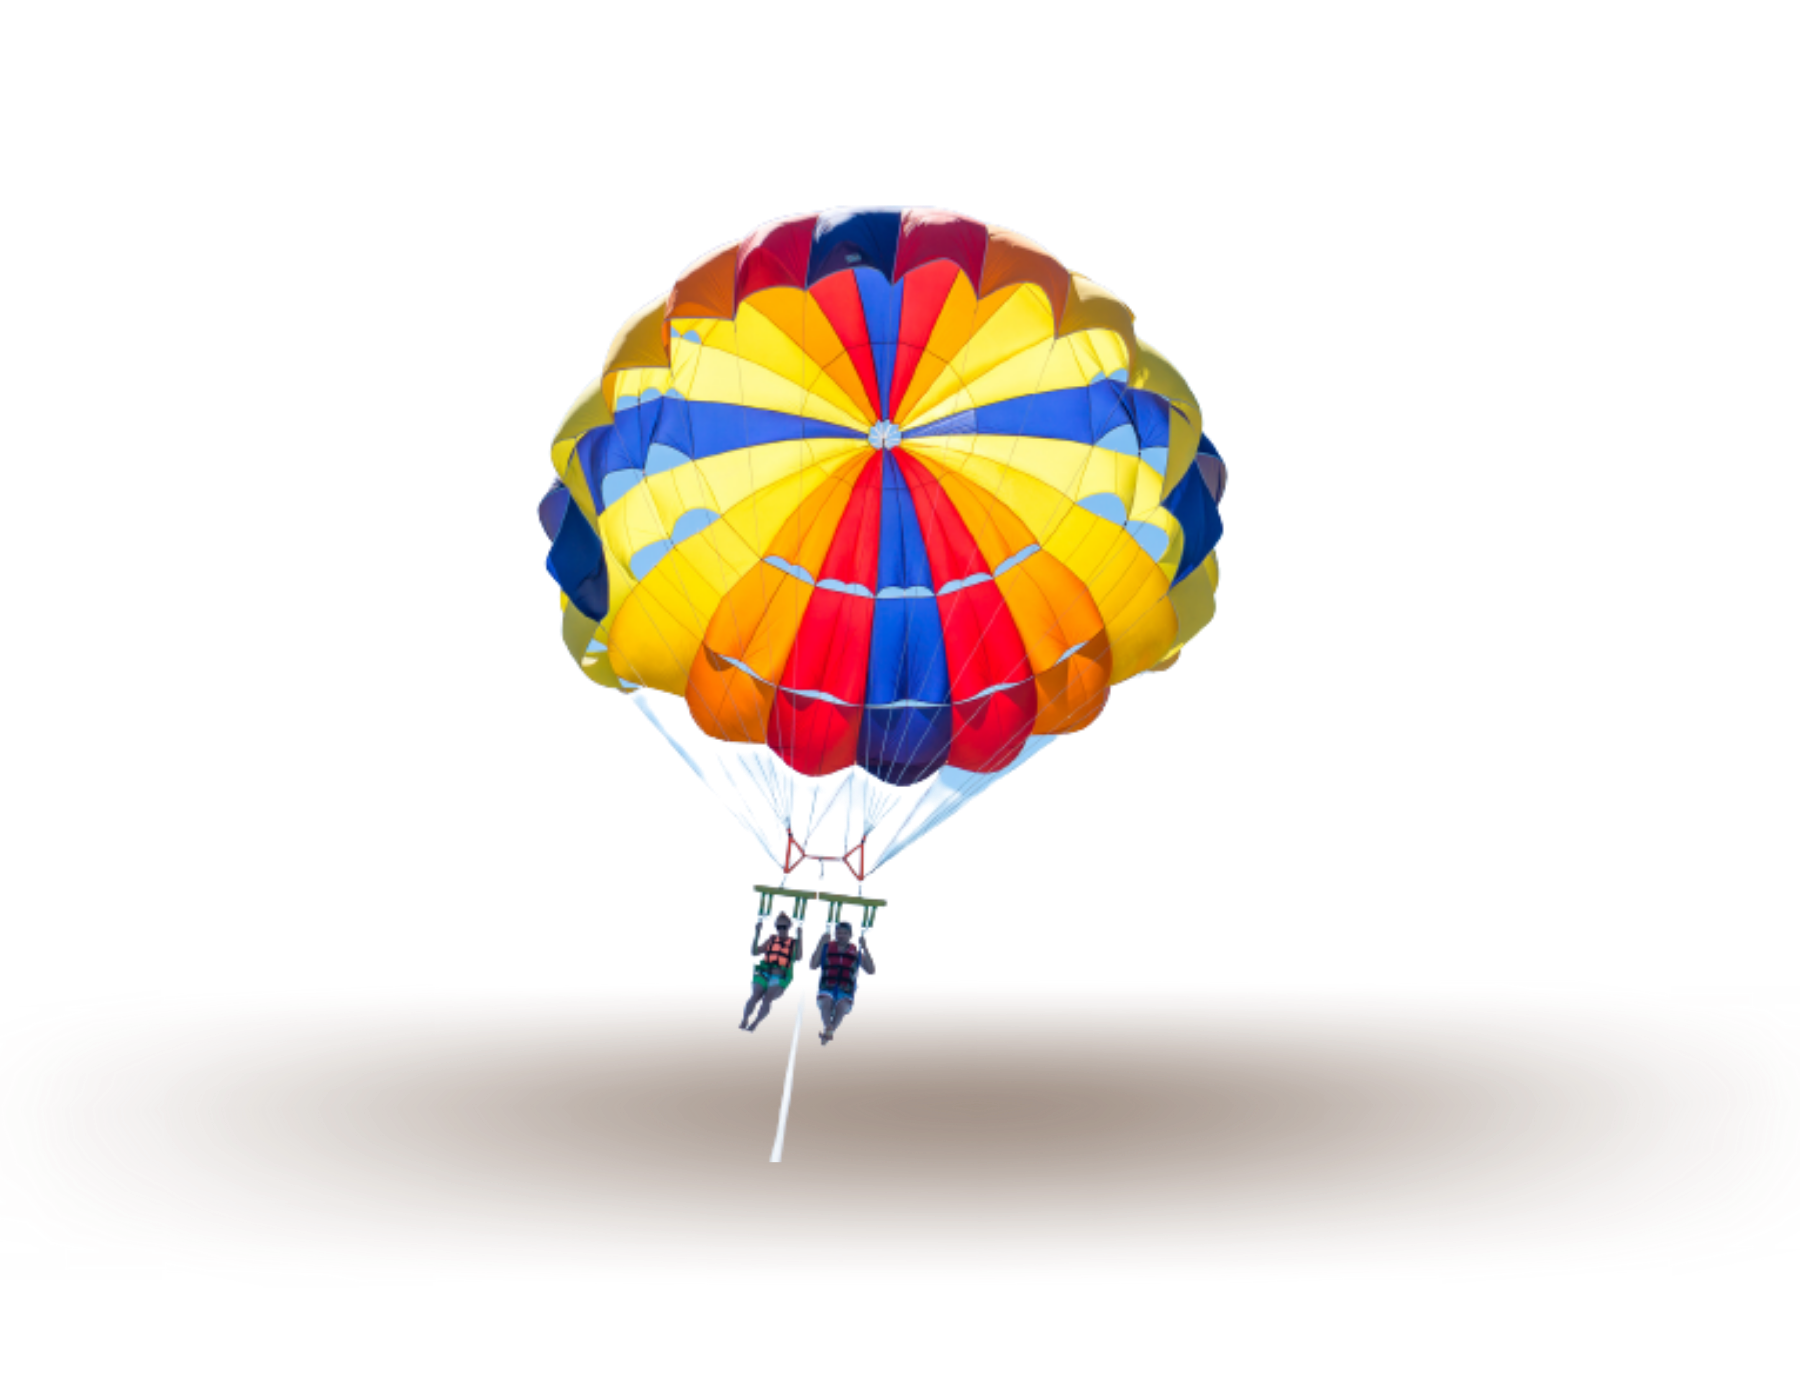 Two people on parasailing